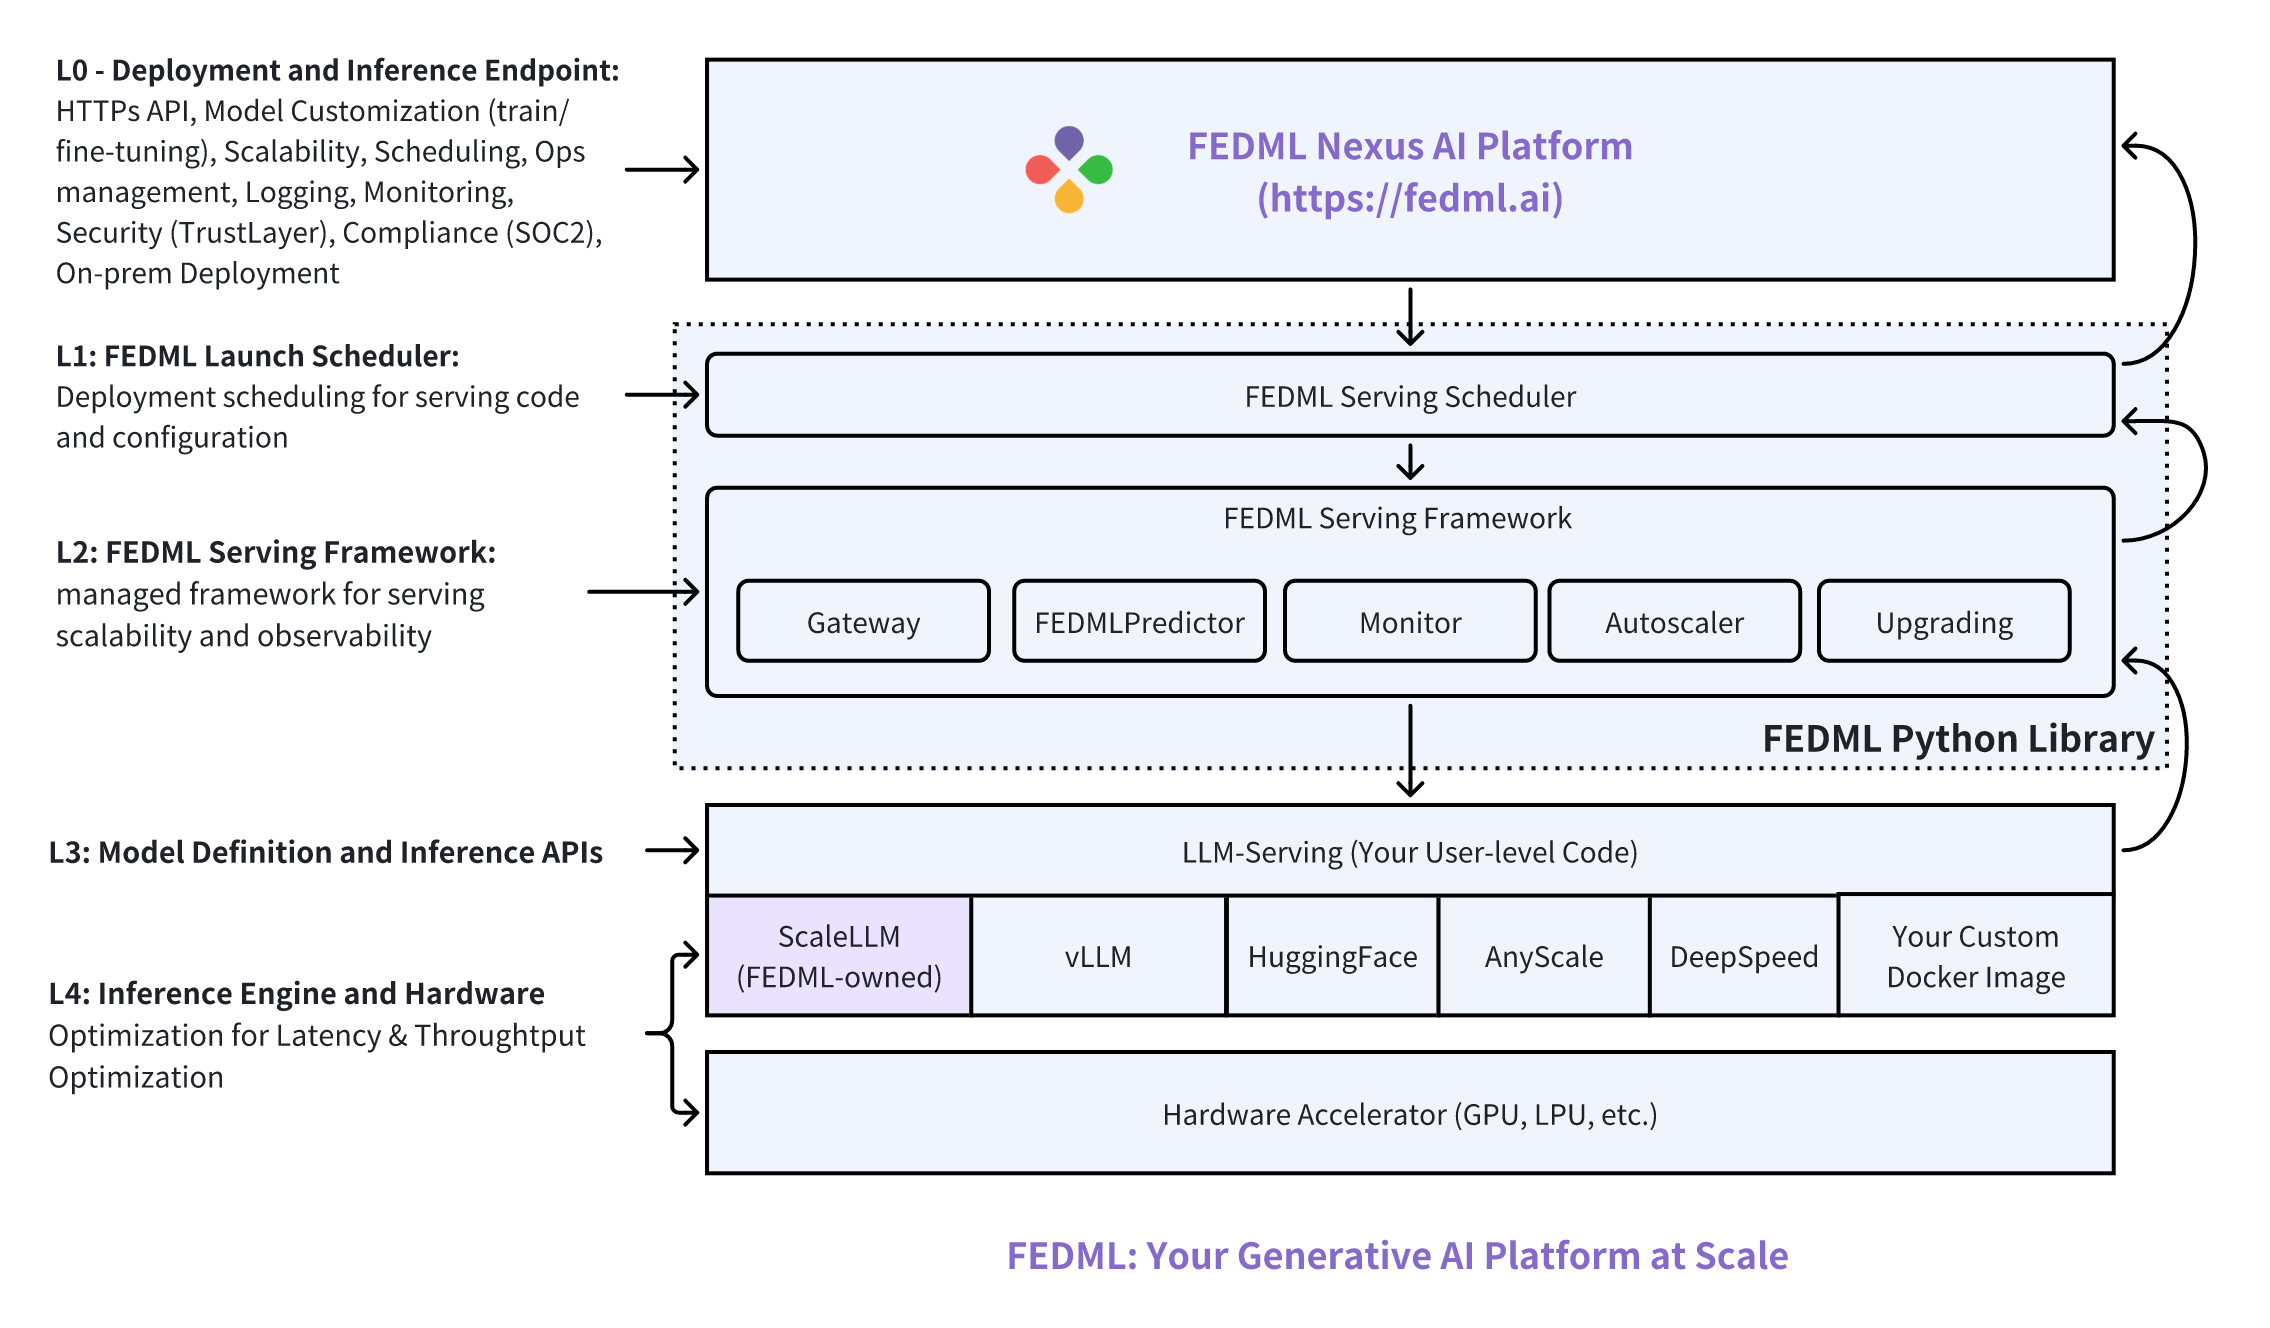 Scalable Model Deployment and Serving on FEDML Nexus AI